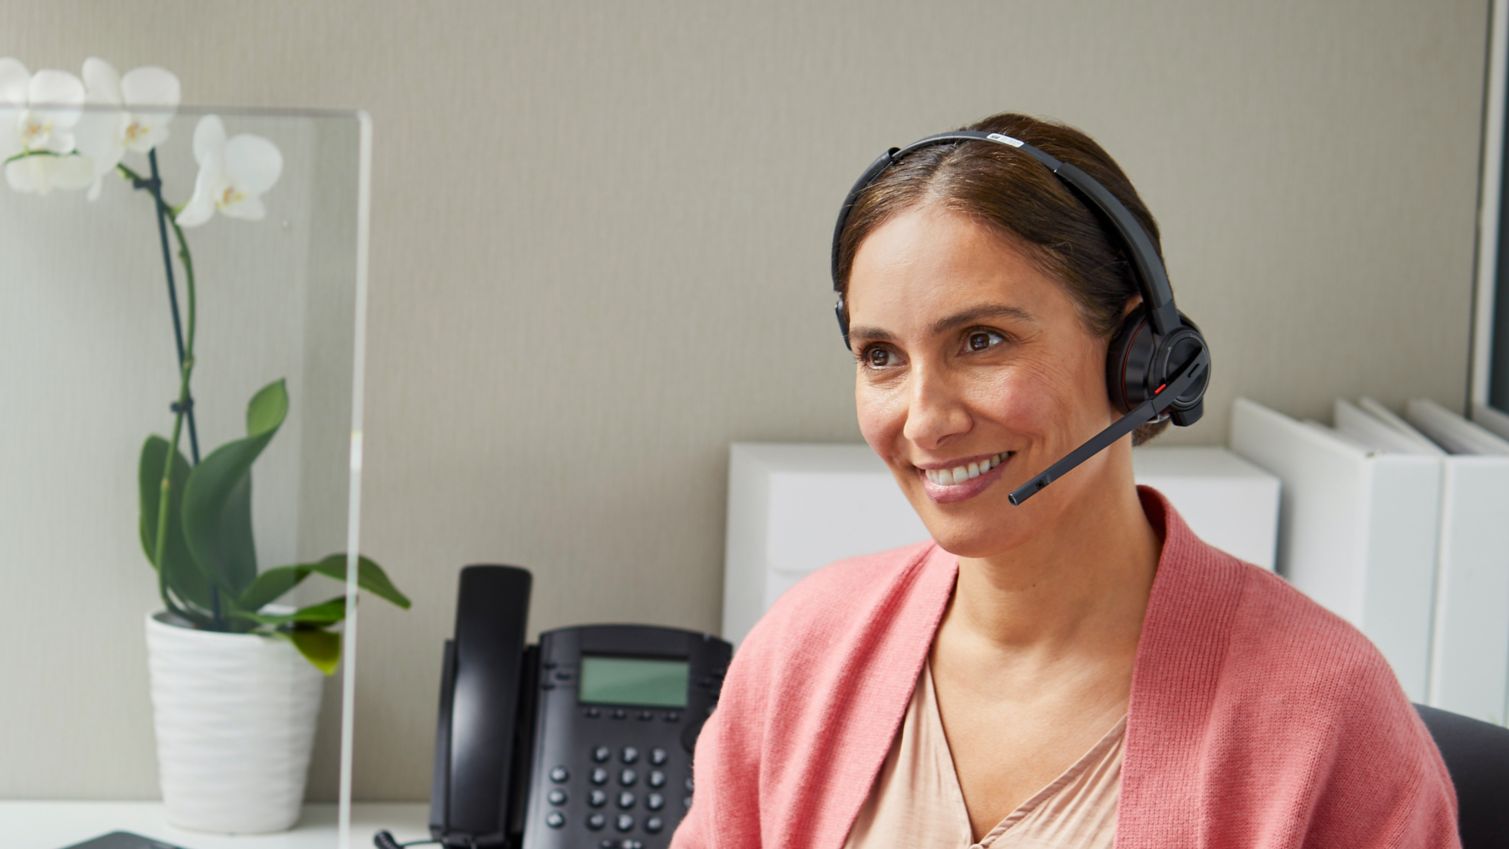 A woman wearing a headset answers a phone call while sitting a computer.